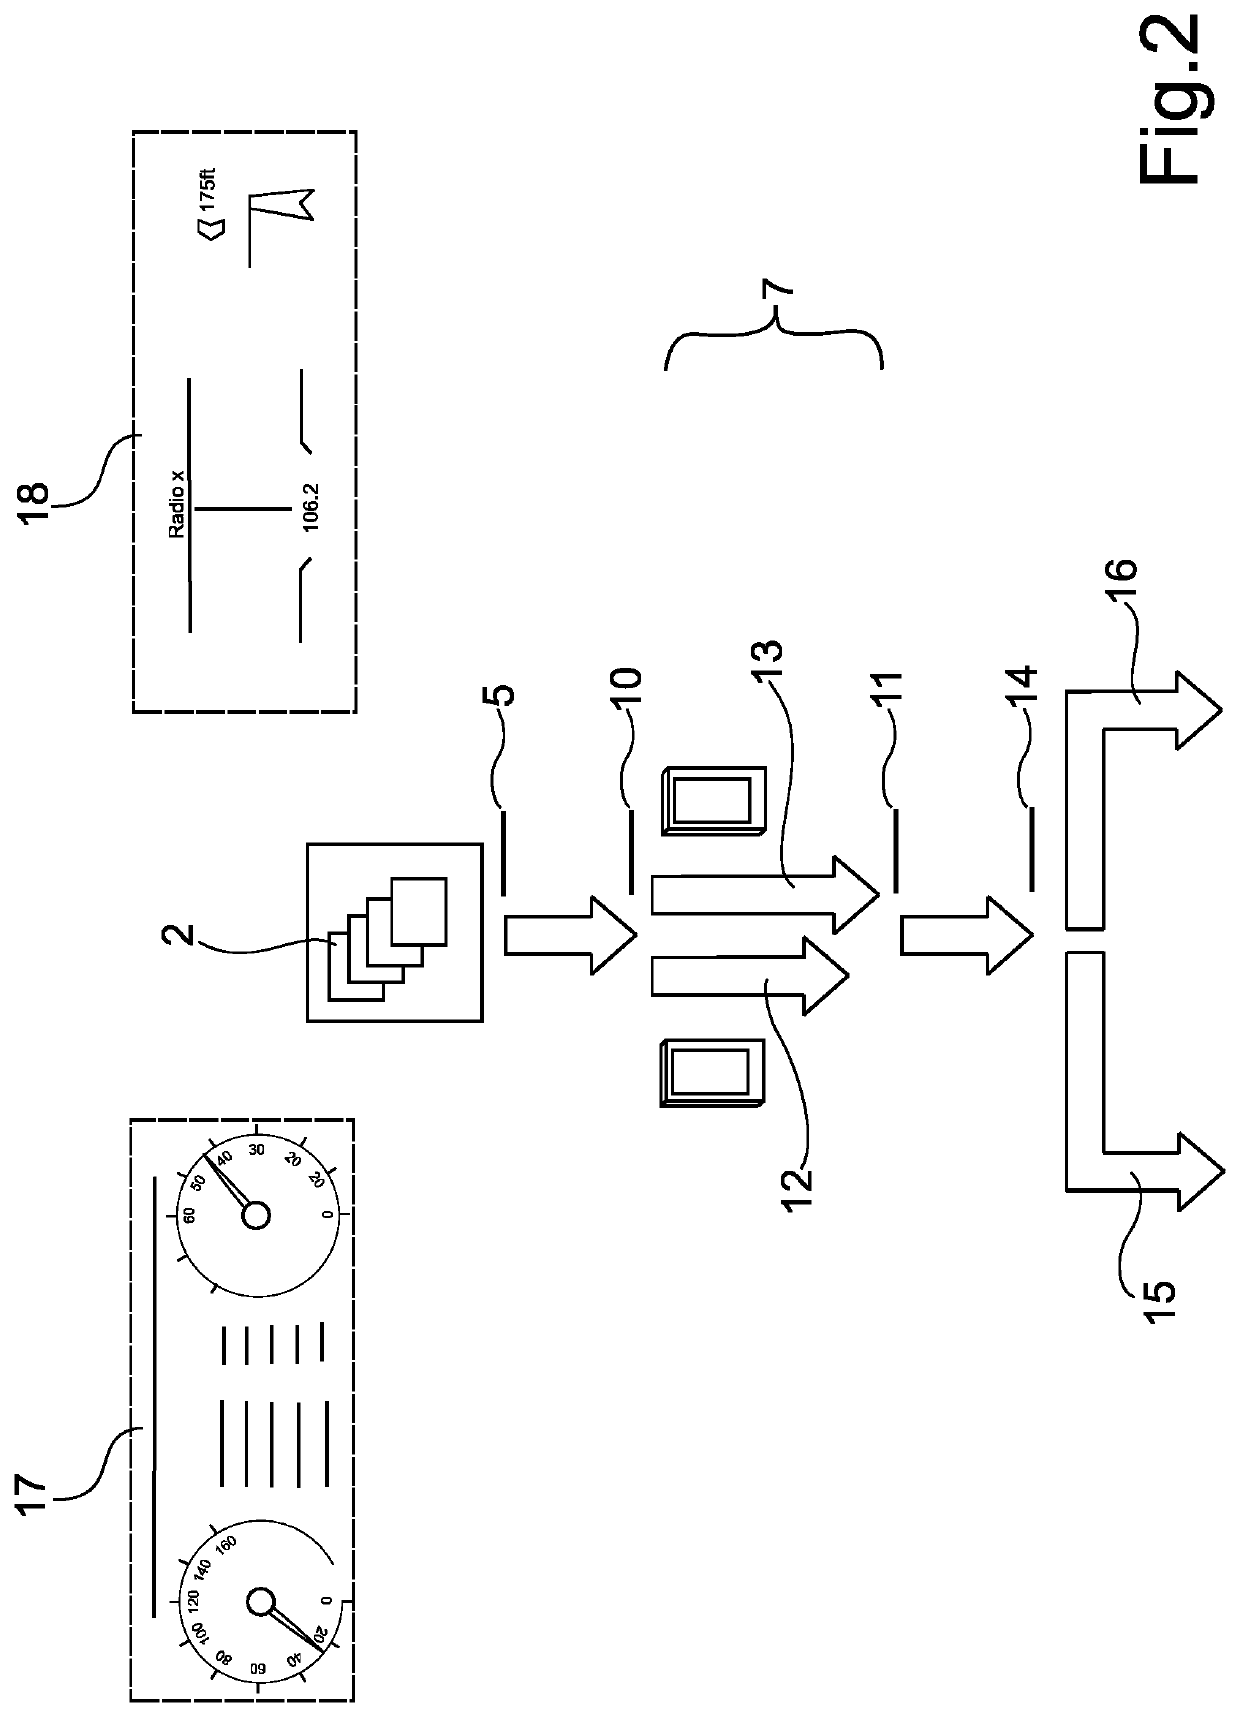 Method for starting an operating system